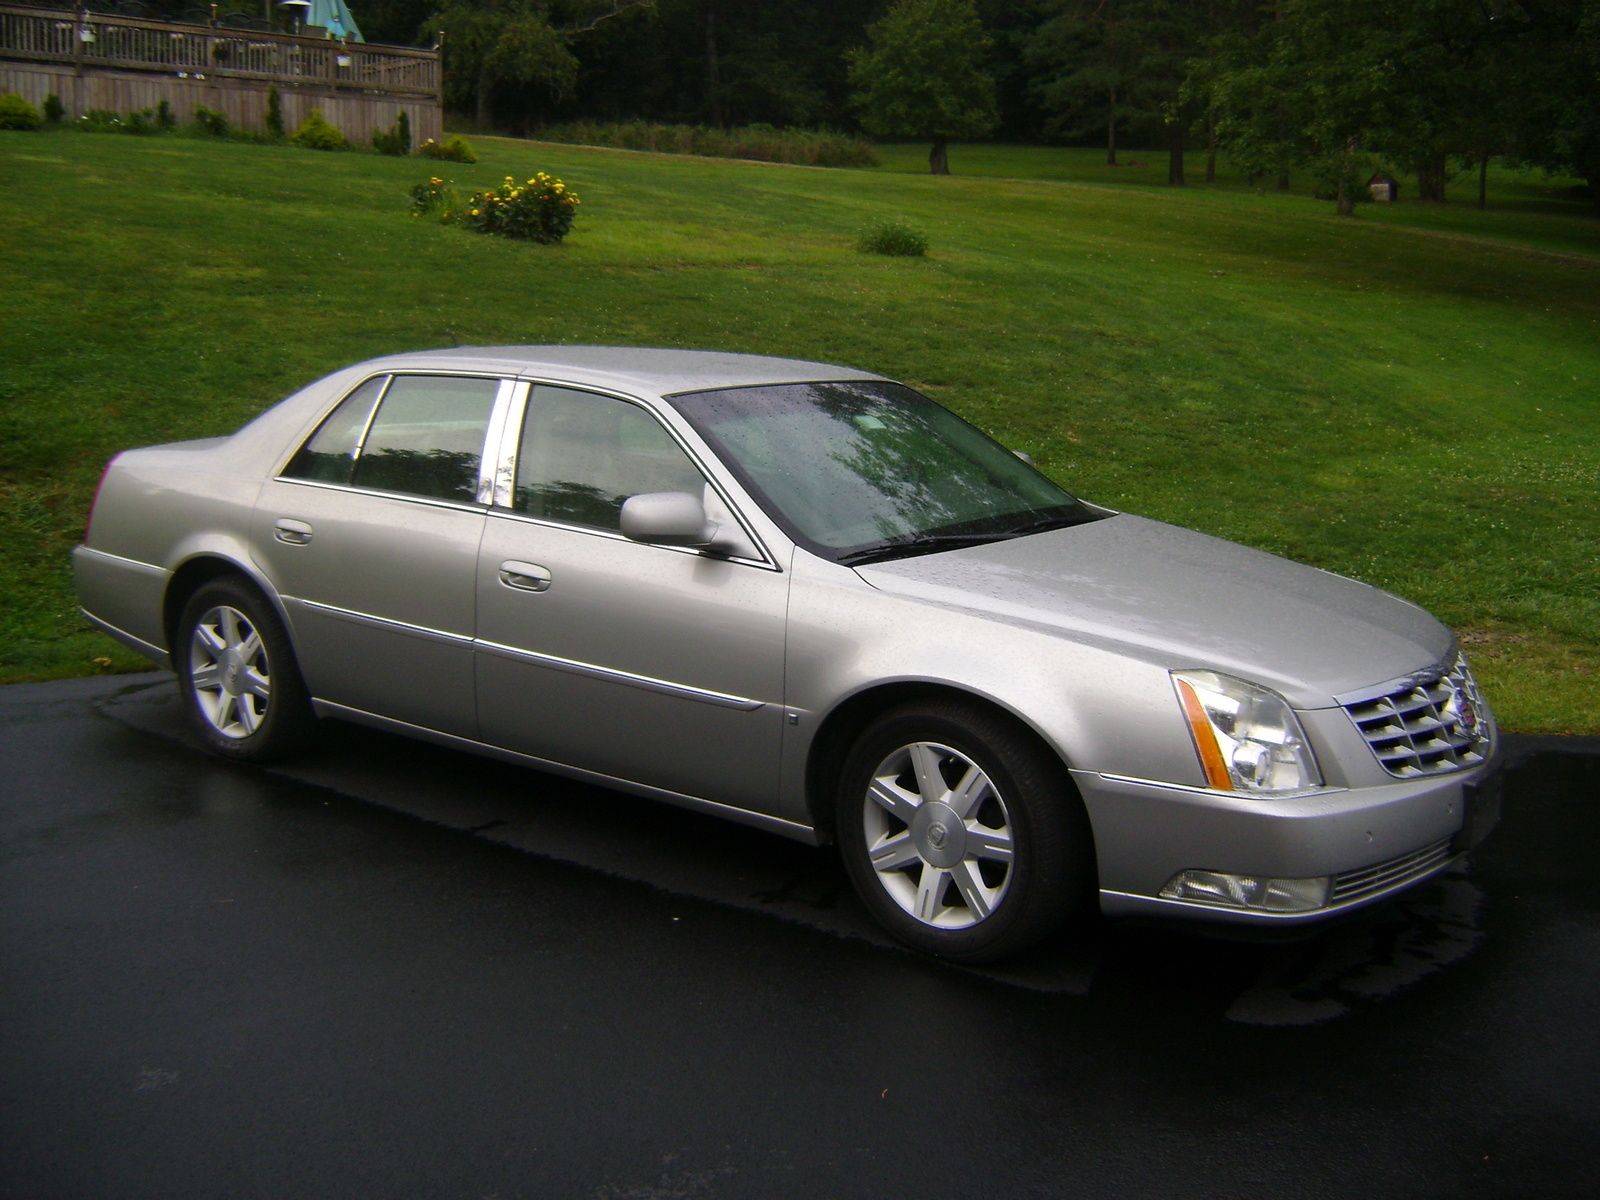 2007 Cadillac DTS 1SD 0-60 Times, Top Speed, Specs, Quarter Mile, and ...